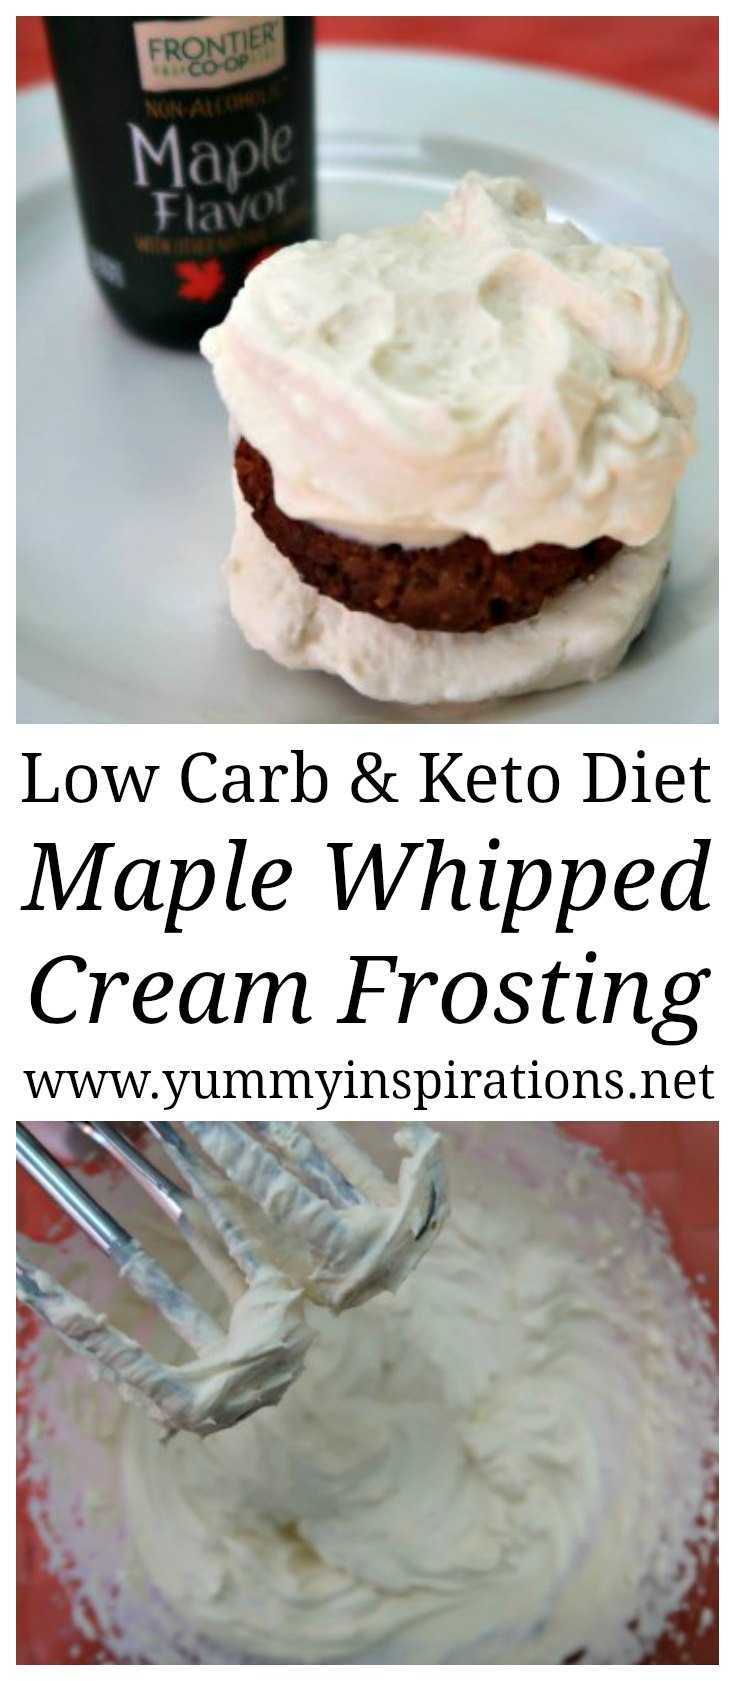 Low Carb Dessert Ideas
 Keto Maple Whipped Cream Frosting Recipe Easy Low Carb